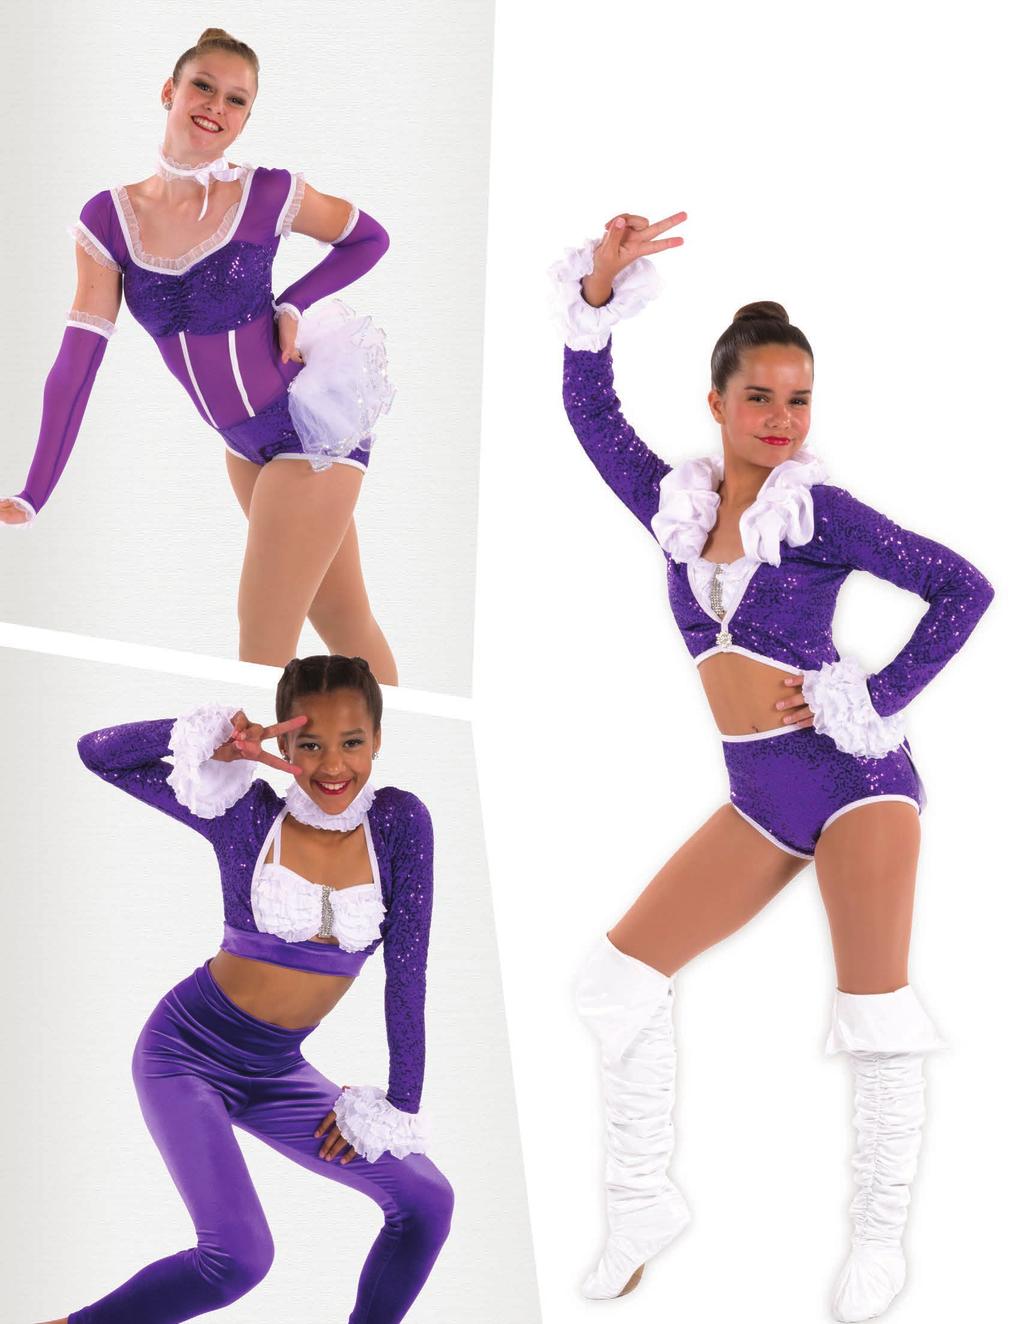 81401 LEOTARD,CHOKER, MITTS (OPT) White stays same PRINCE Colors: Purple, Black Shown: Purple 81403 JACKET, BRA, BRIEF, BOOT COVERS (OPT) White